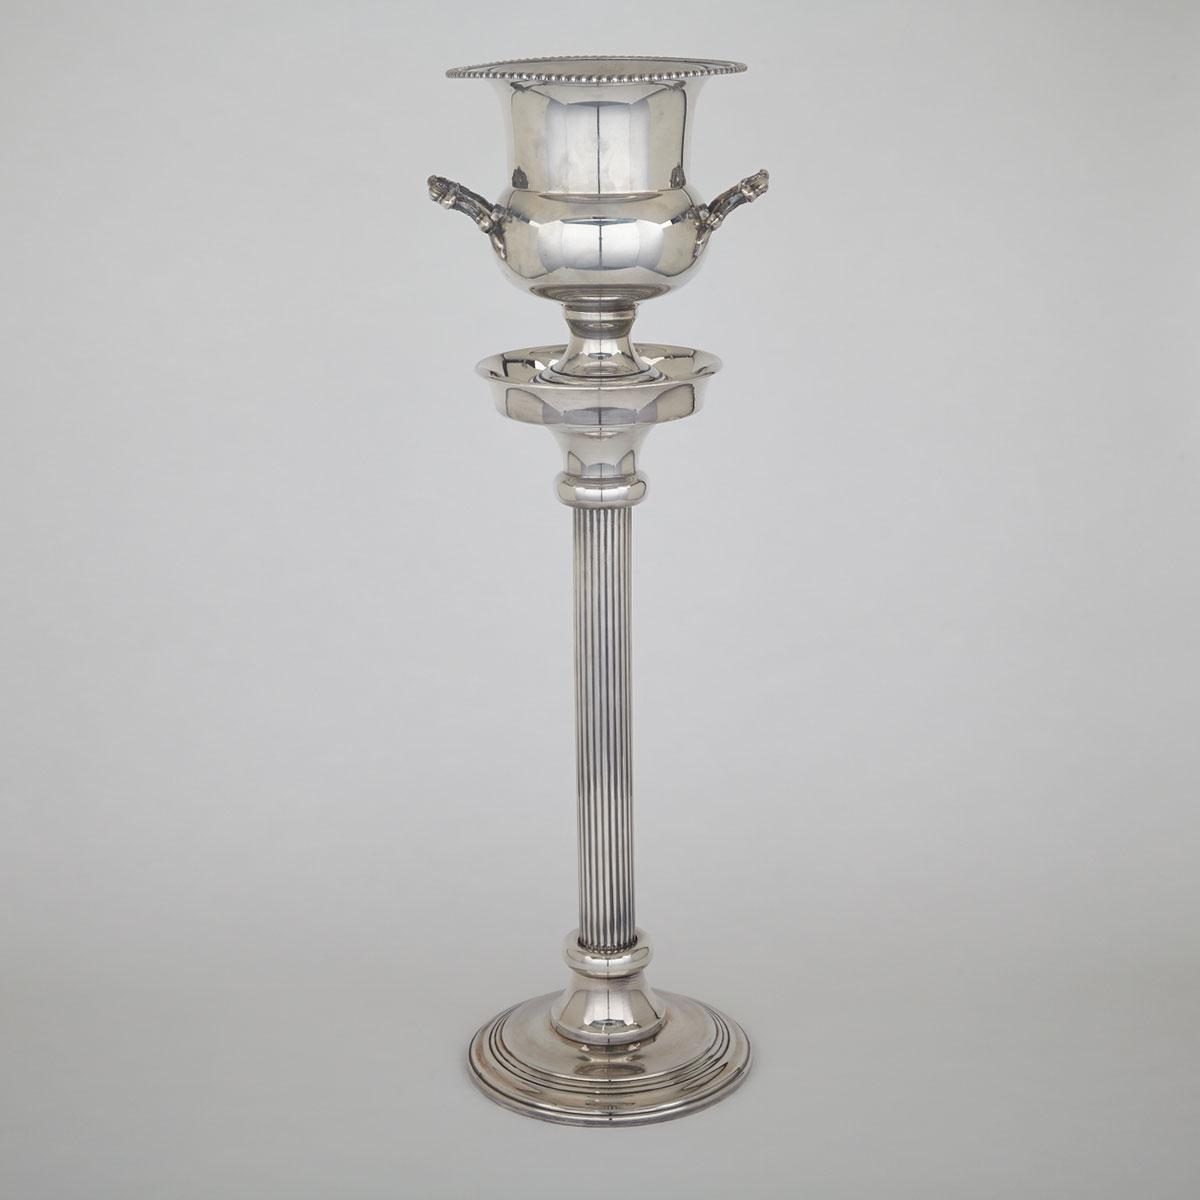 Birks Regency Silver Plated Wine Cooler and Stand, 20th century